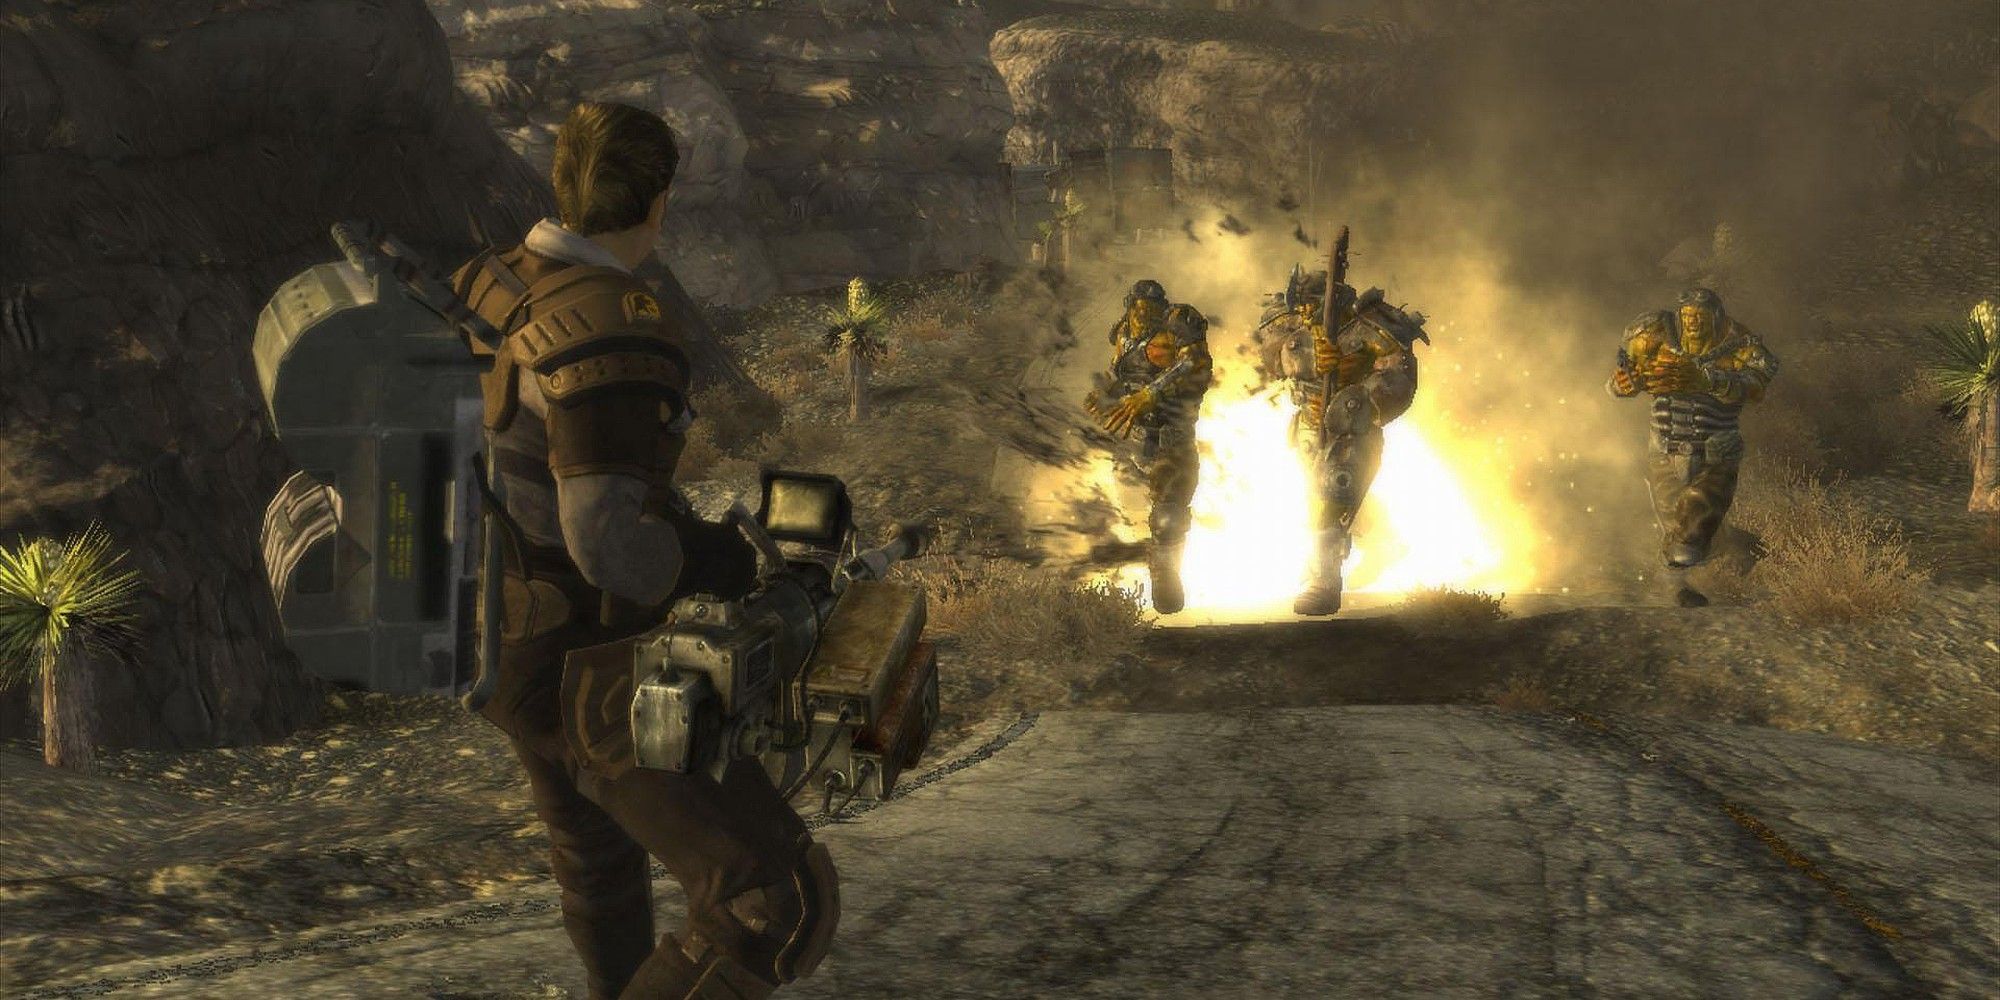 An explosion from Fallout: New Vegas